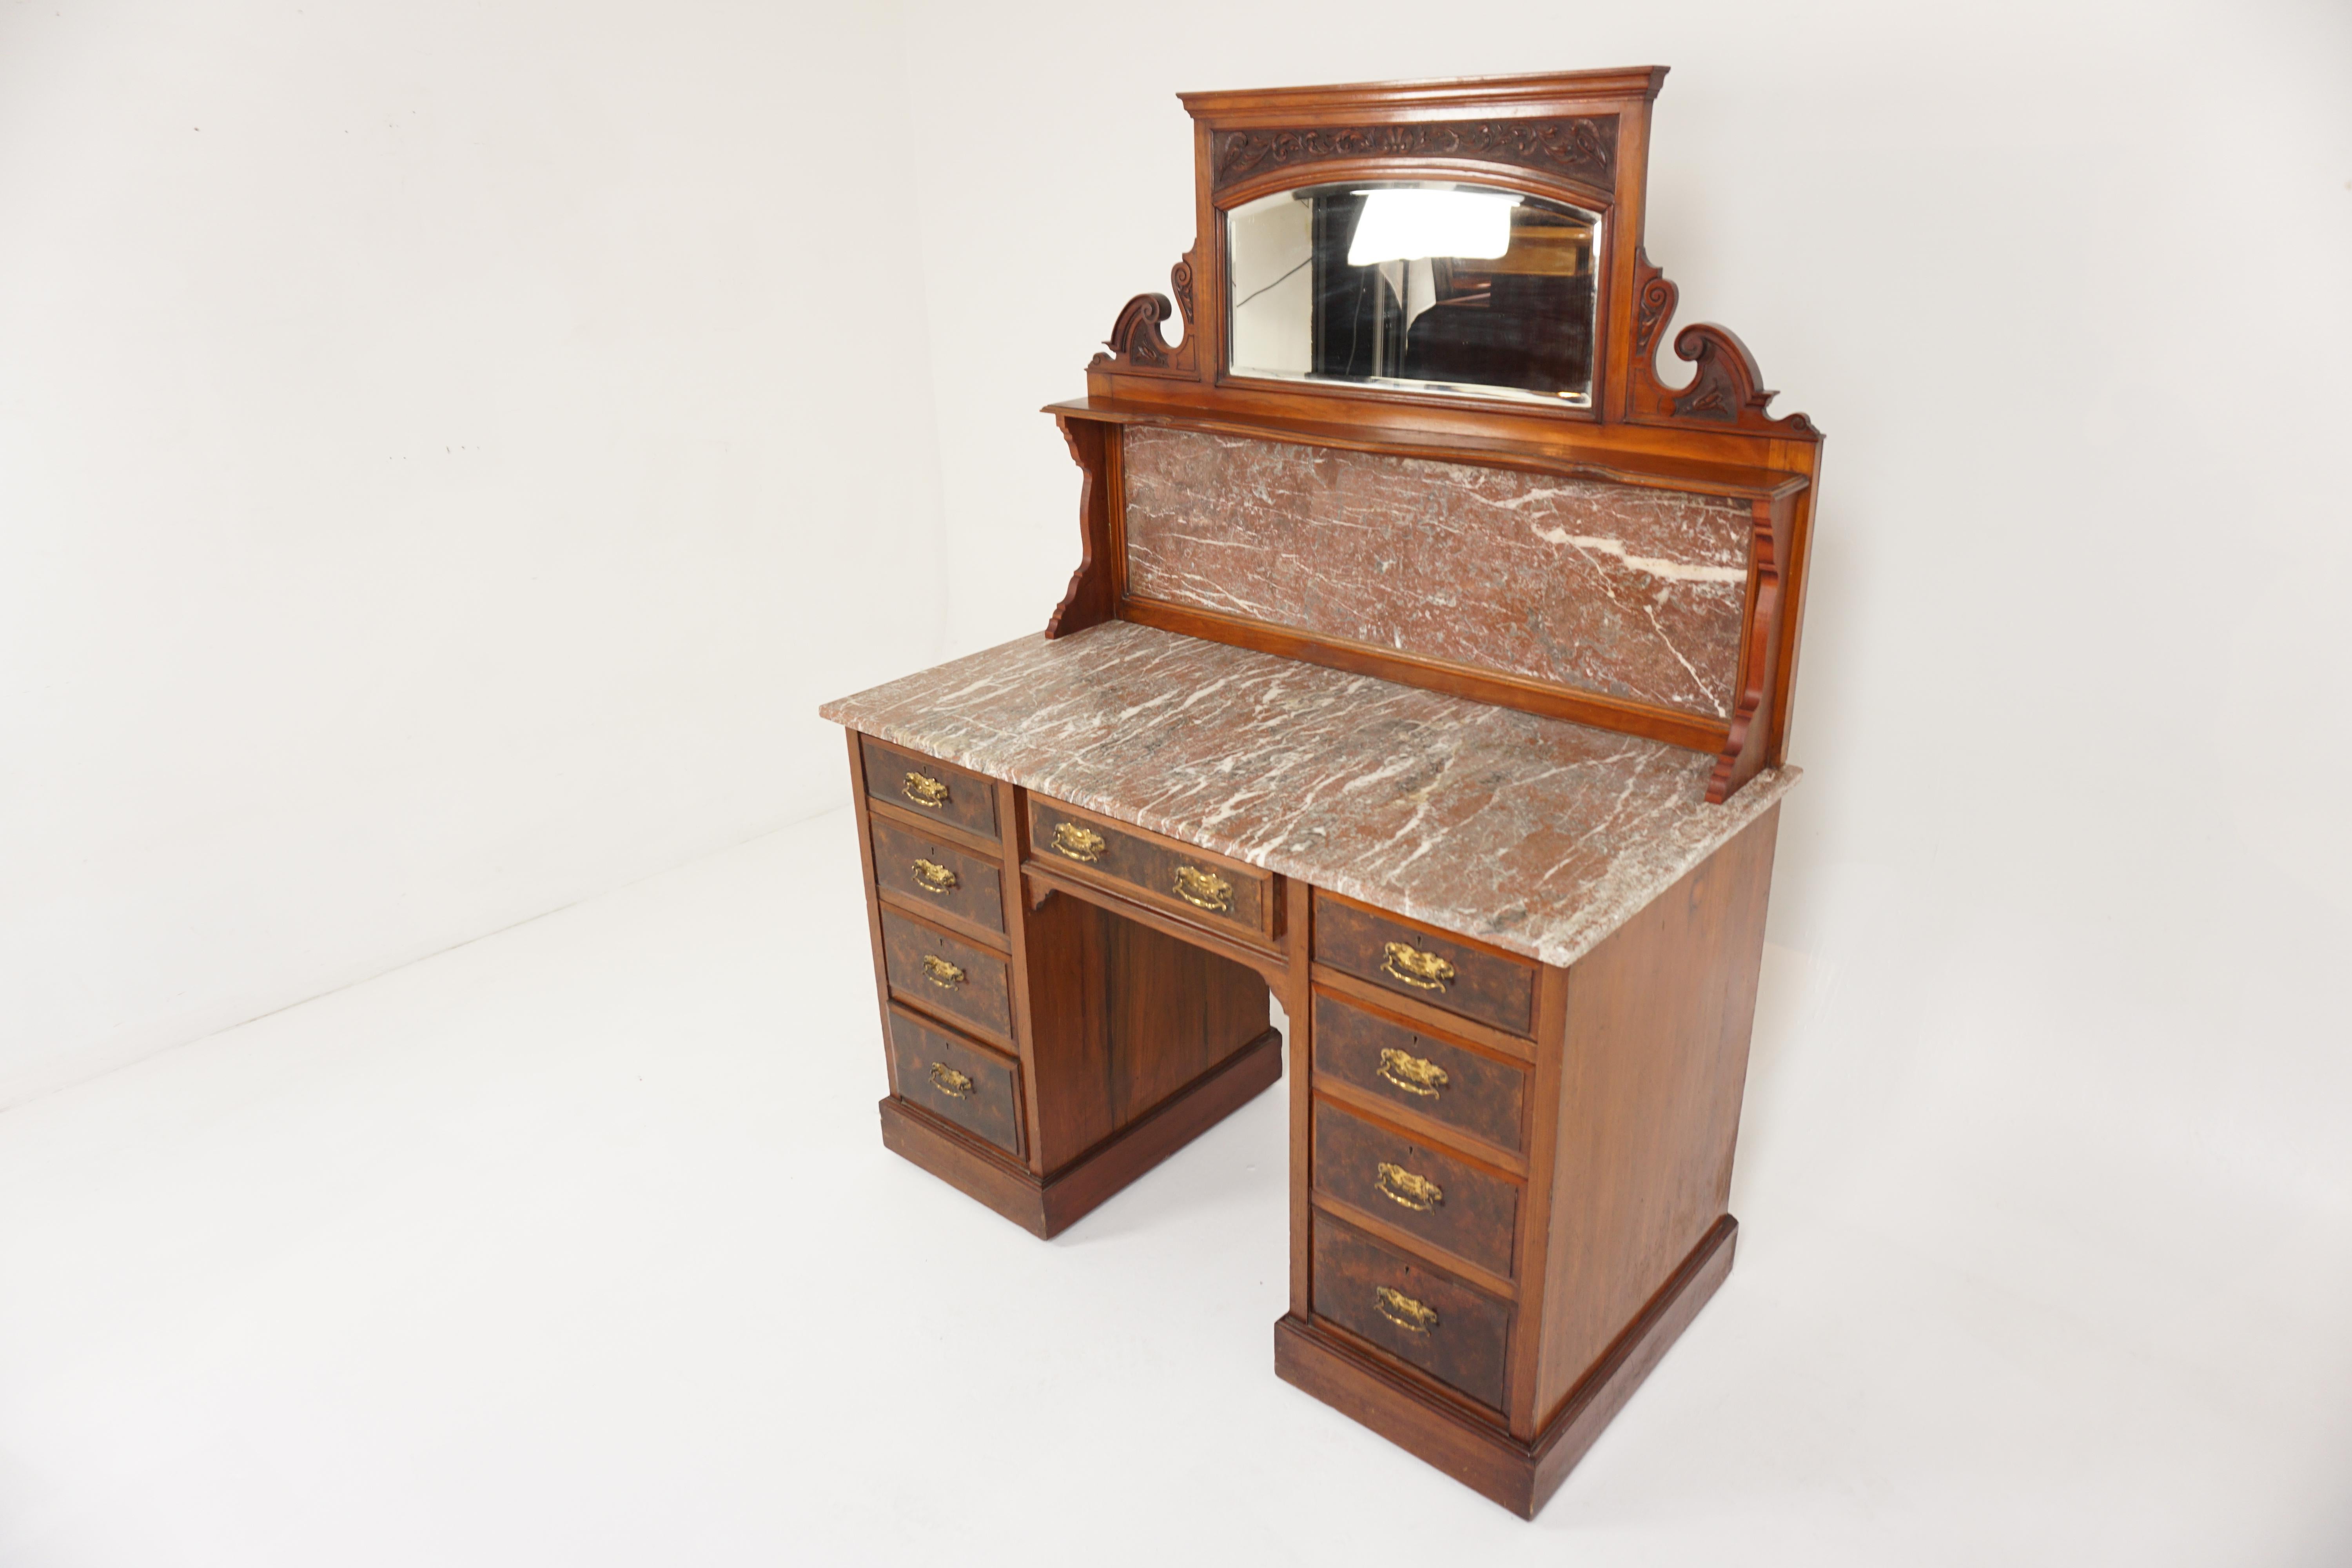 Victorian Marble Top Washstand, Dressing Chest Vanity, Scotland 1880, H215

Scotland 1880
Solid Walnut
Original Finish
Mirrored back with original rose marble
With carved detail above and marble below
Pair of four drawer pedestals with original